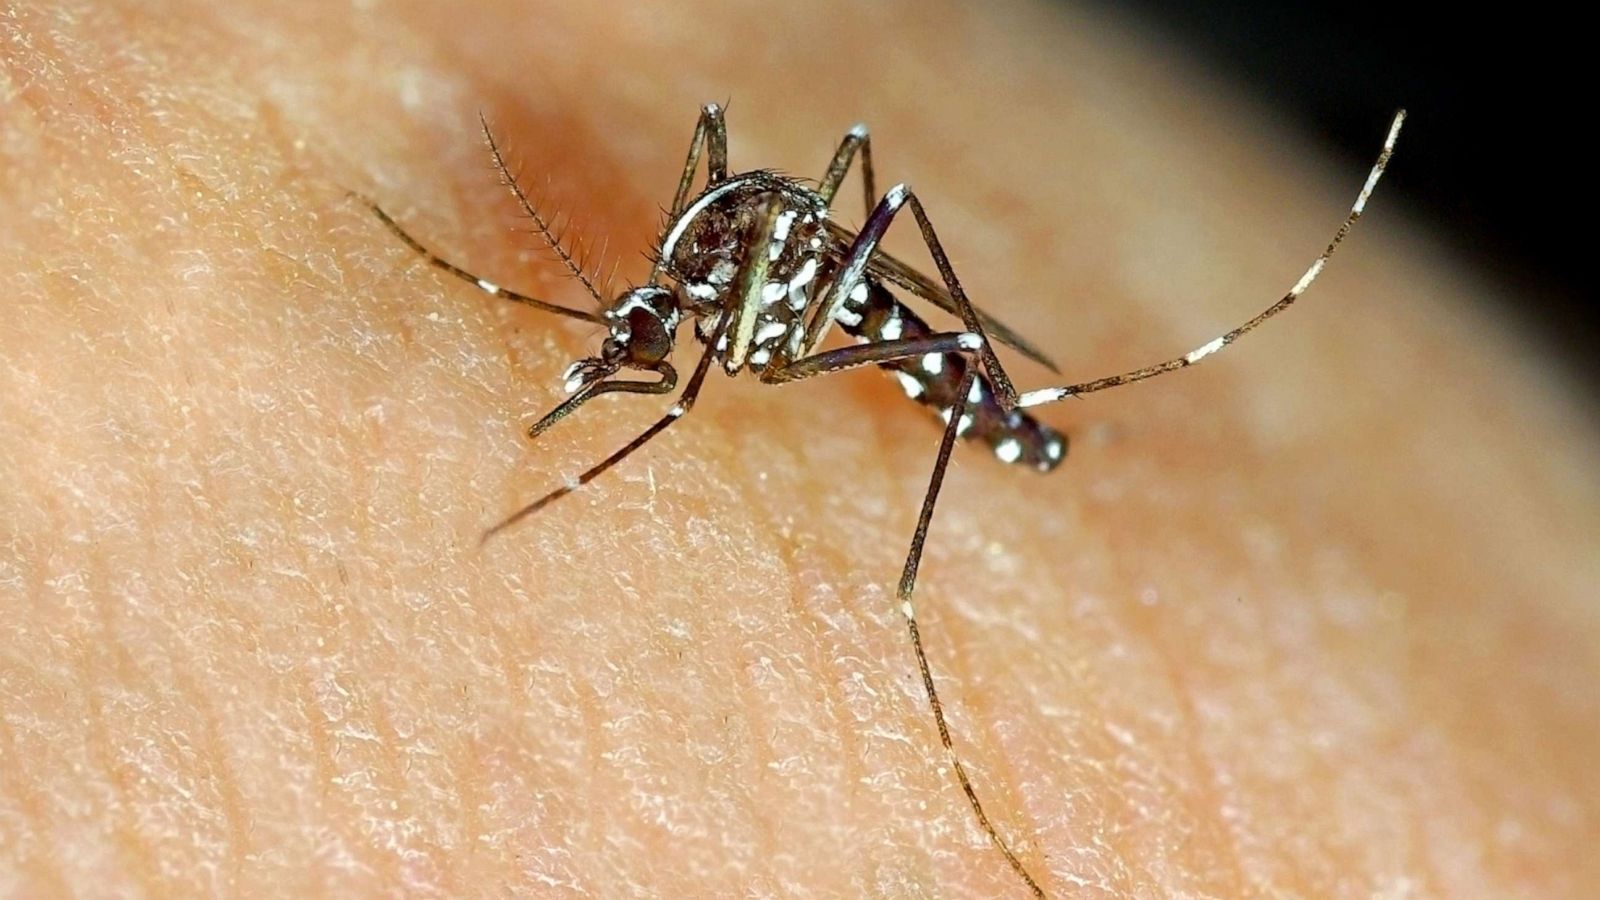 Why sugar may stop mosquito bites - ABC News